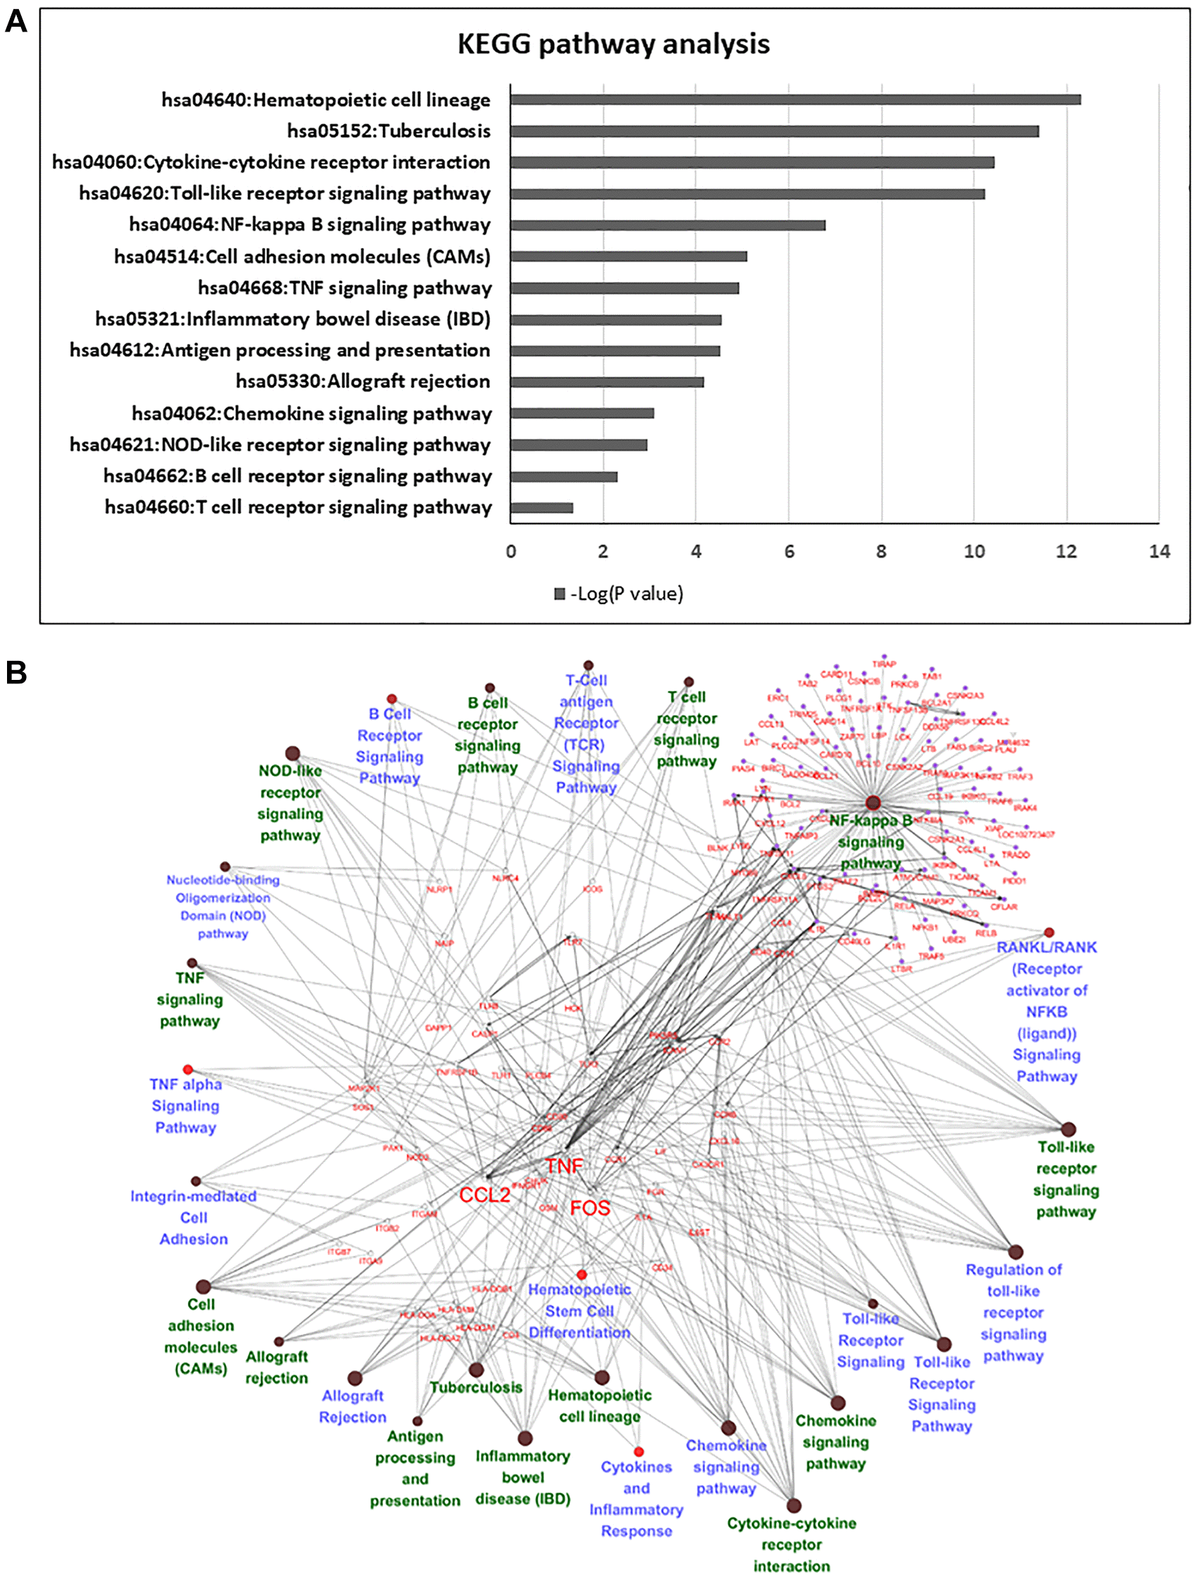 Pathway analysis of differentially expressed genes in serum and serum-free culture systems. (A) The list of candidate genes from 14 overlapping pathways between Wiki pathway and KEGG pathway. (B) Network analysis with cytoscape in 56 candidate genes in the 14 overlapping pathways.